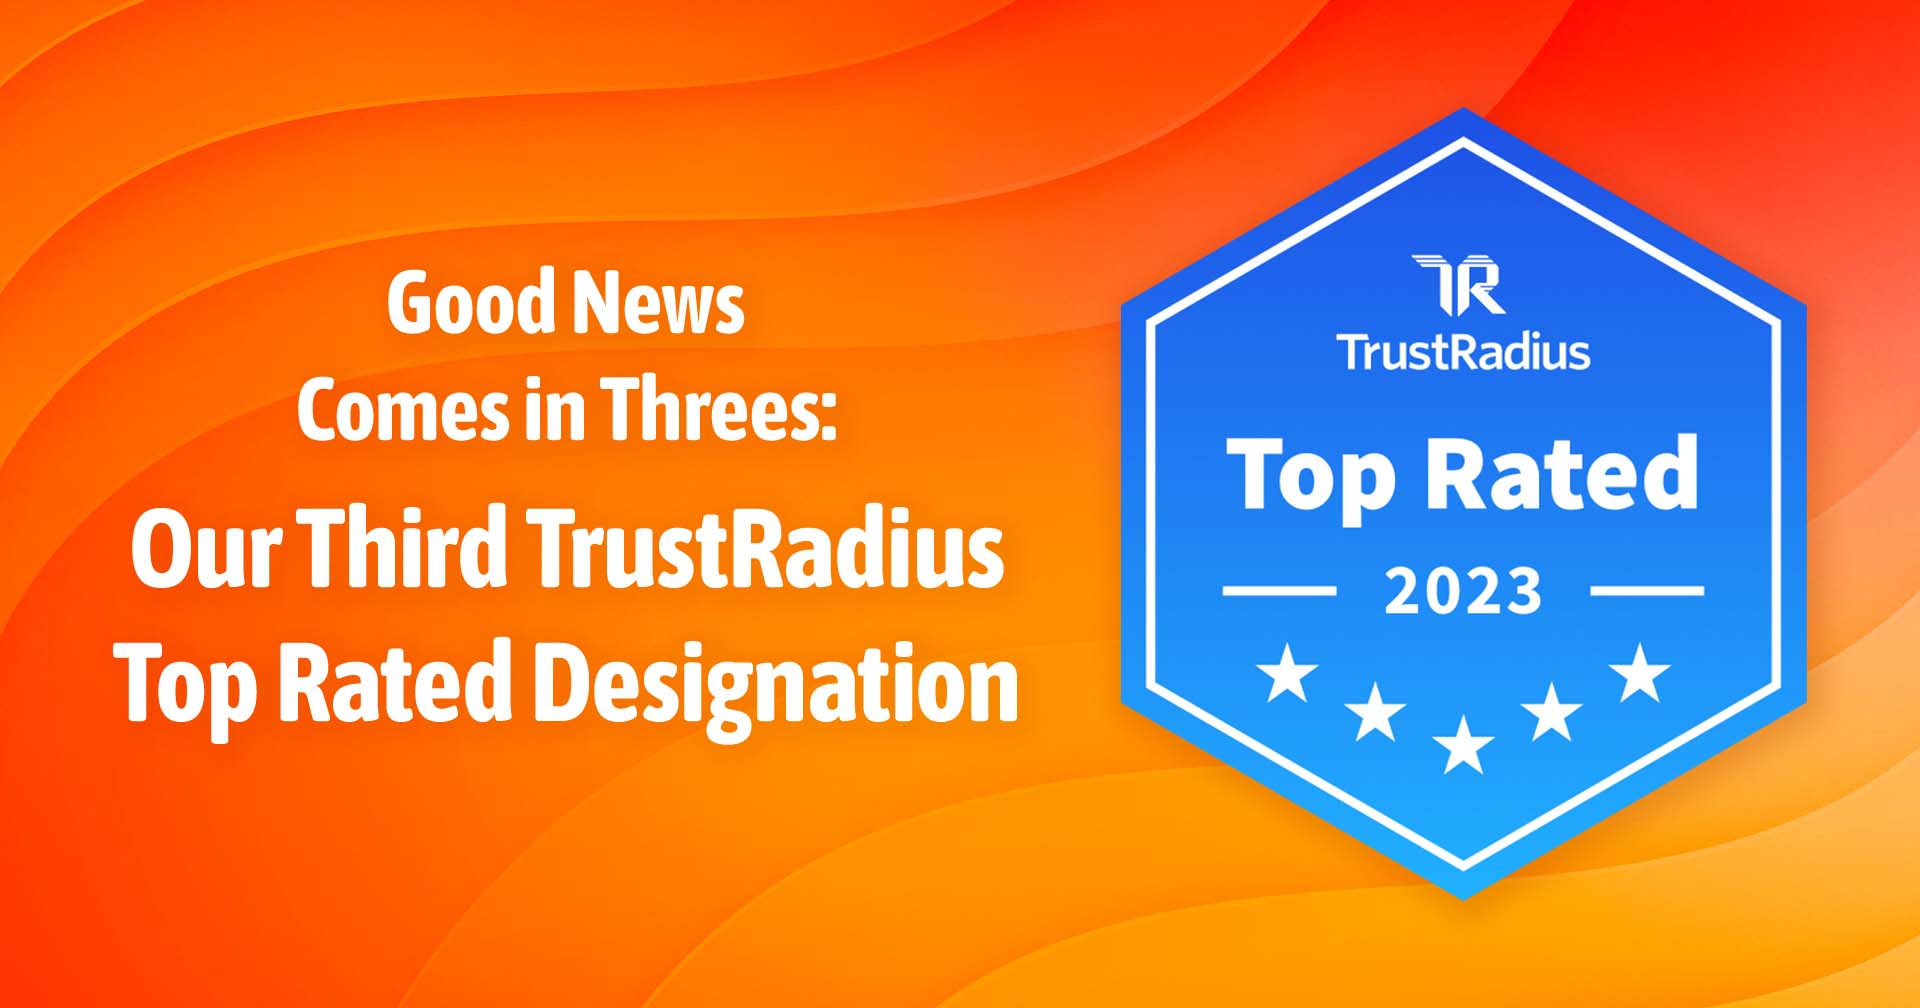 Good News Comes in Threes: Our Third TrustRadius Top Rated Designation featured image.